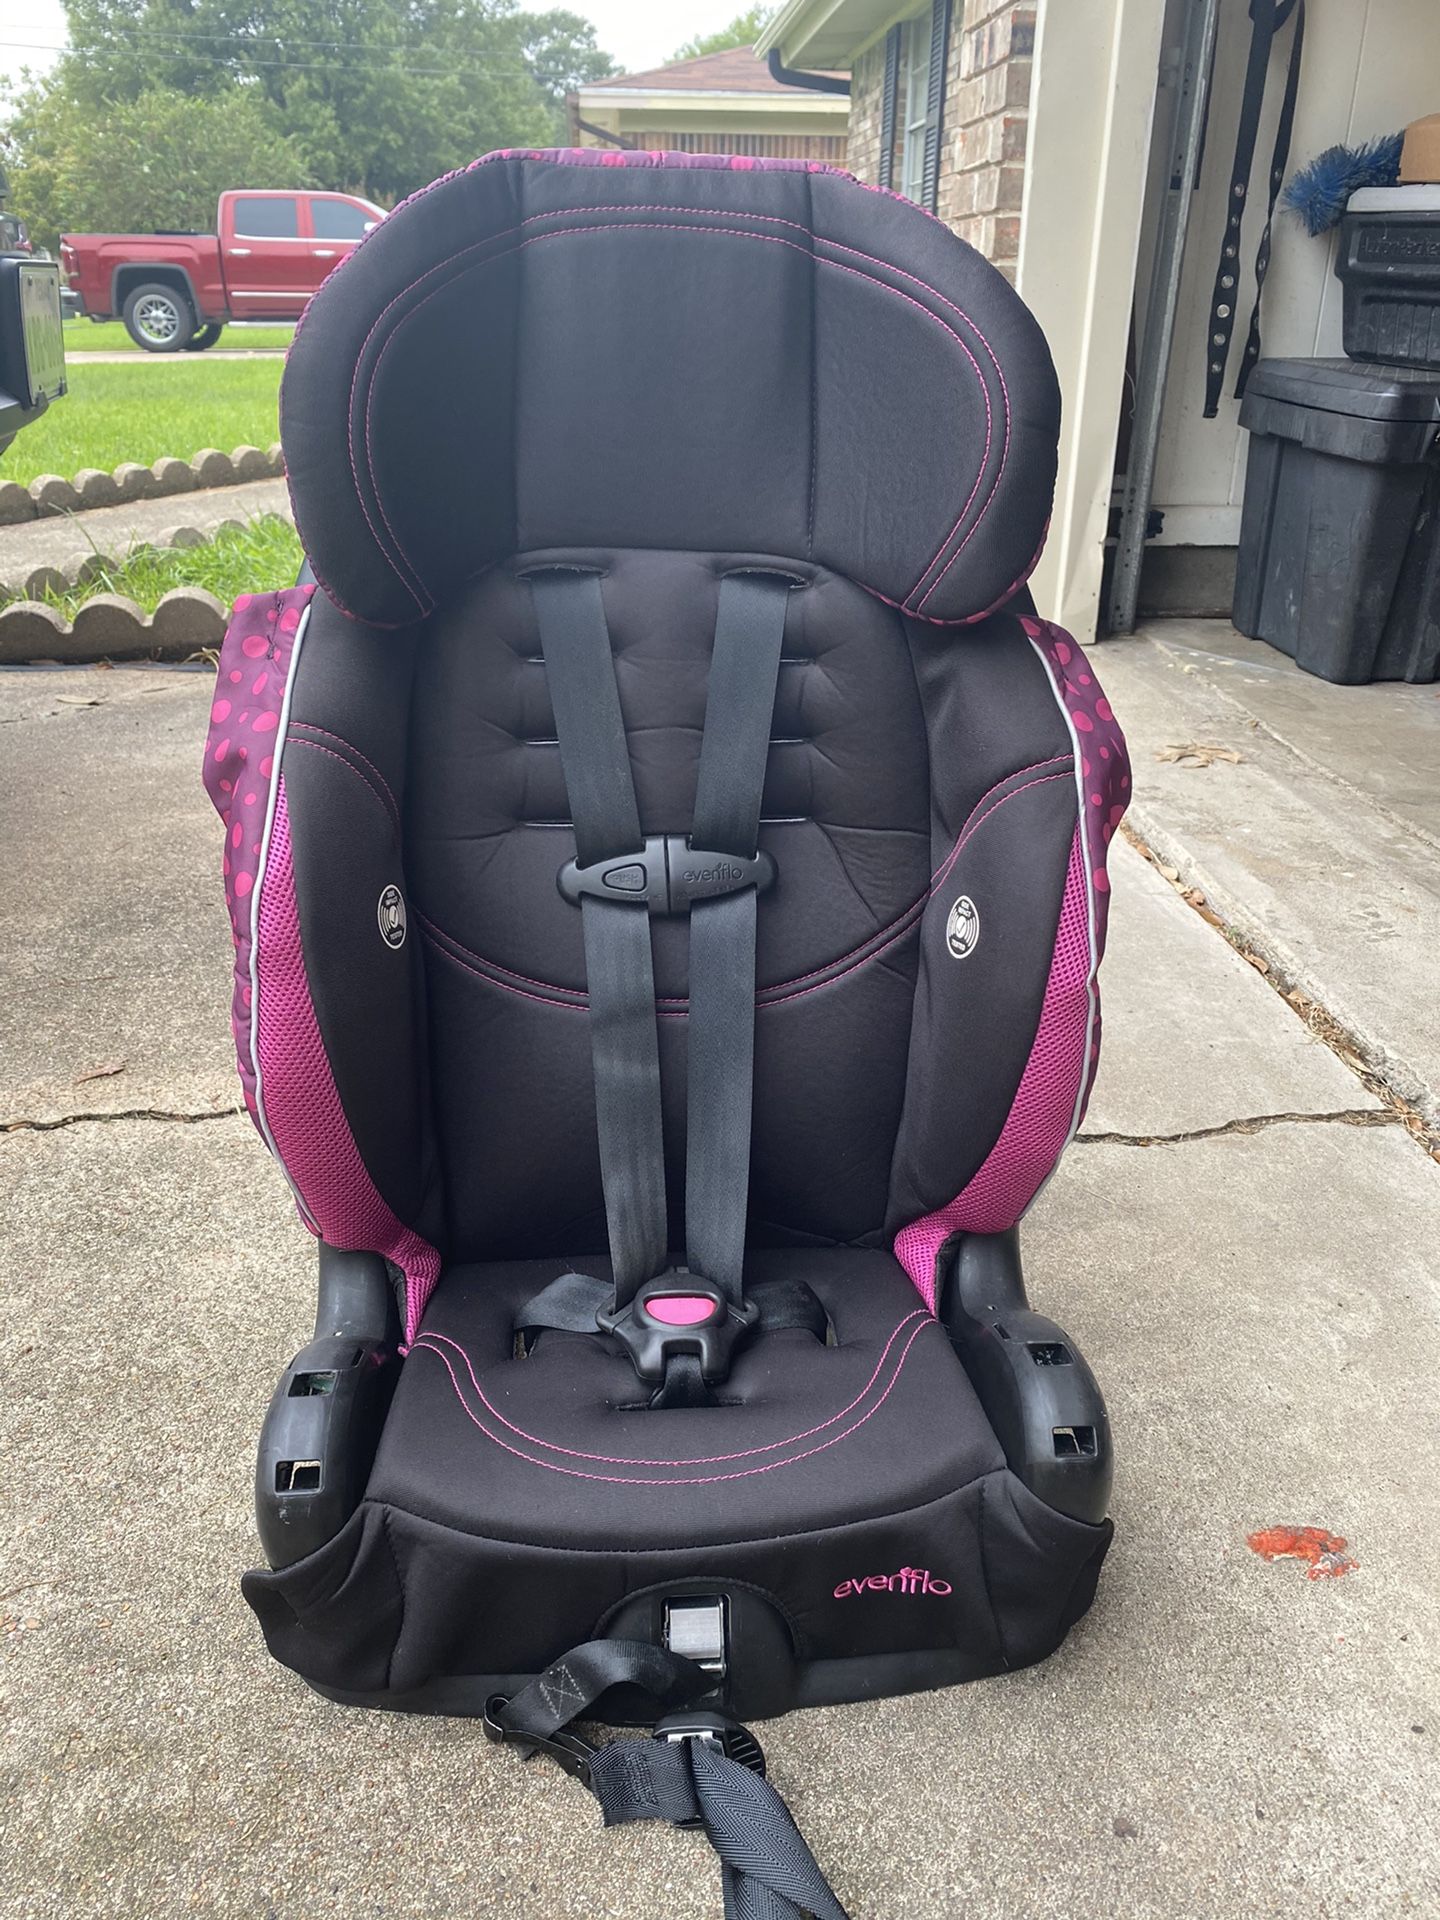 Evenflo carseat chase booster with harness